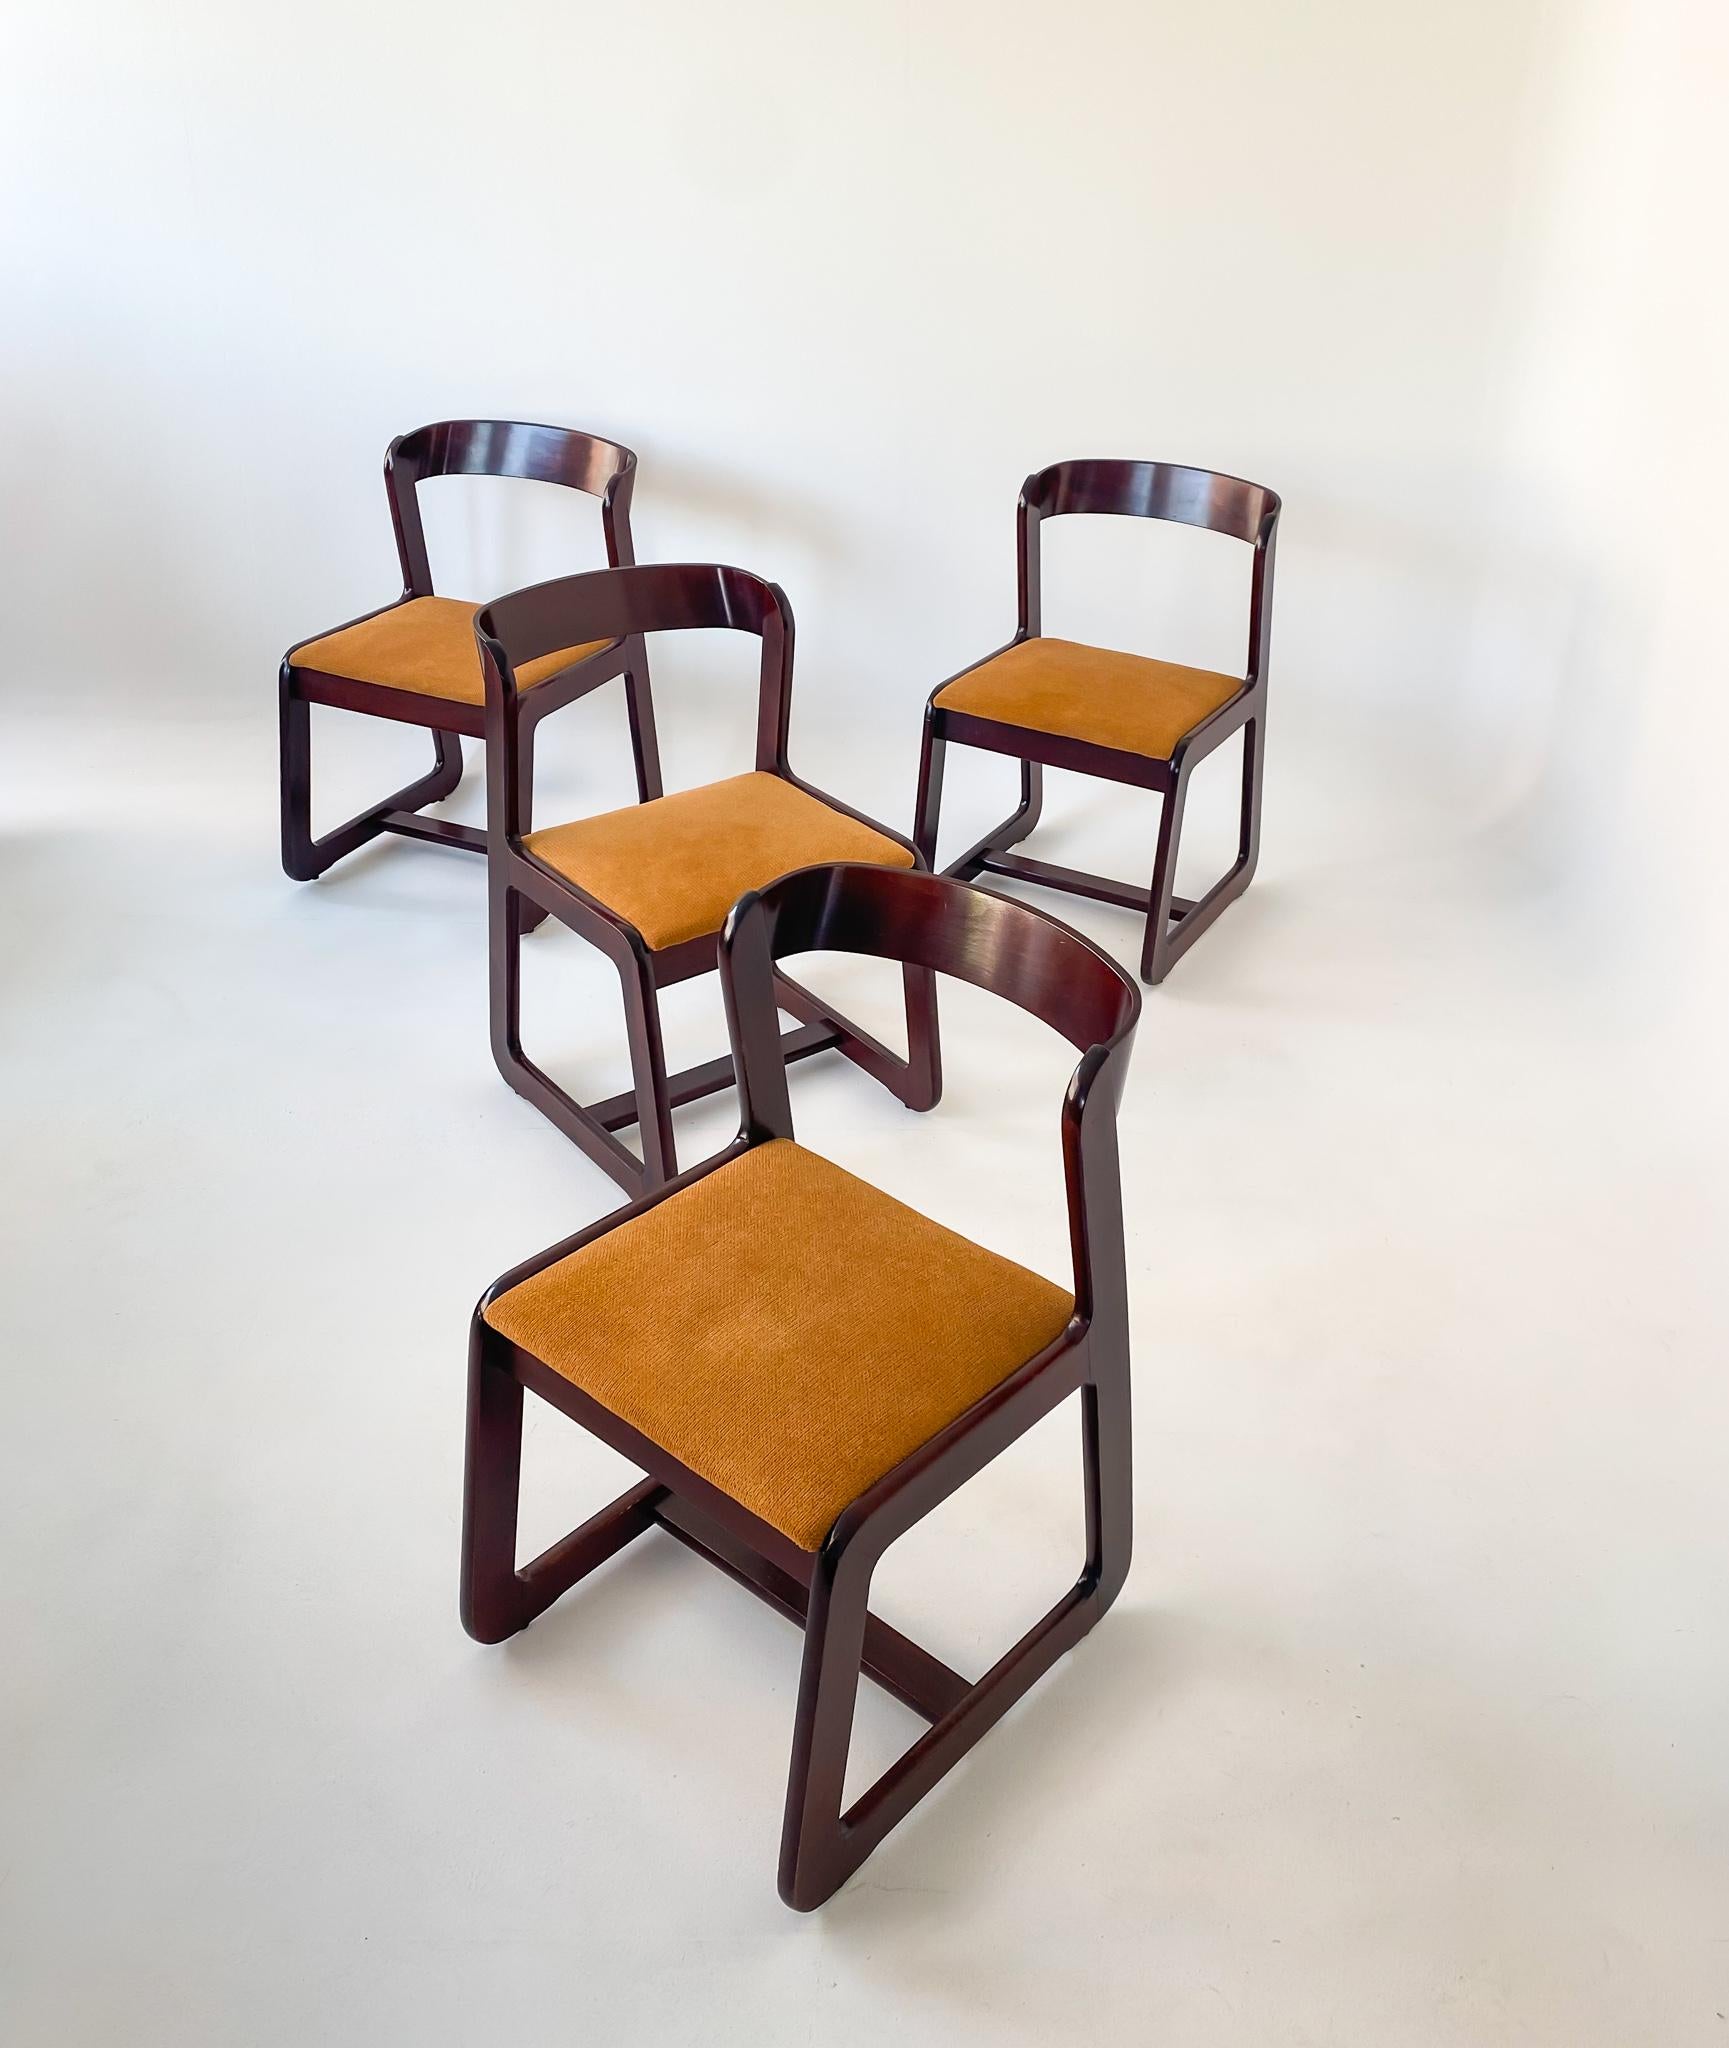 Mid-Century Modern Set of 4 dining chairs by Willy Rizzo for Mario Sabot 1970s.

This dining set of 4 chairs by the Italian Designer Willy Rizzo consists of a wooden frame in light reddish mahogany tone. The seats were re-covered with a matching